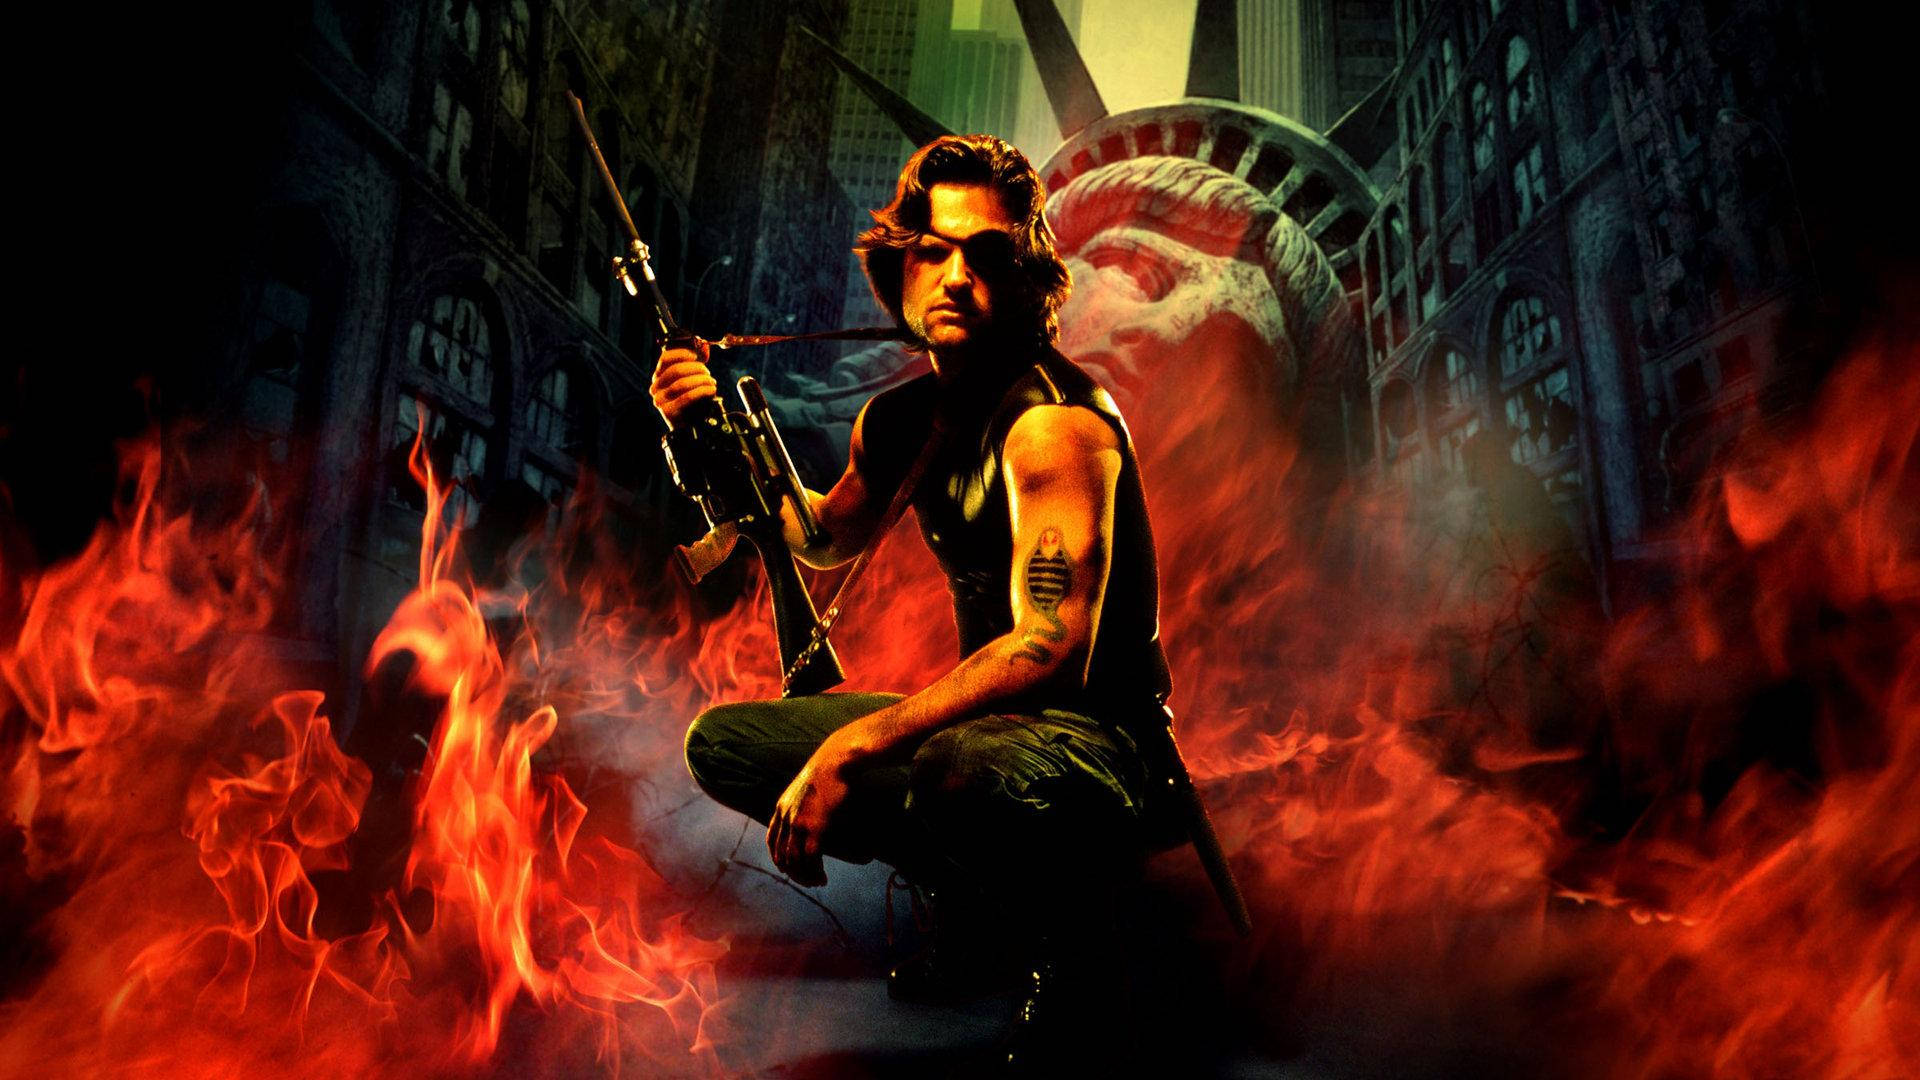 Iconic Actor Kurt Russell in 'Escape From New York' as Snake Plissken Wallpaper